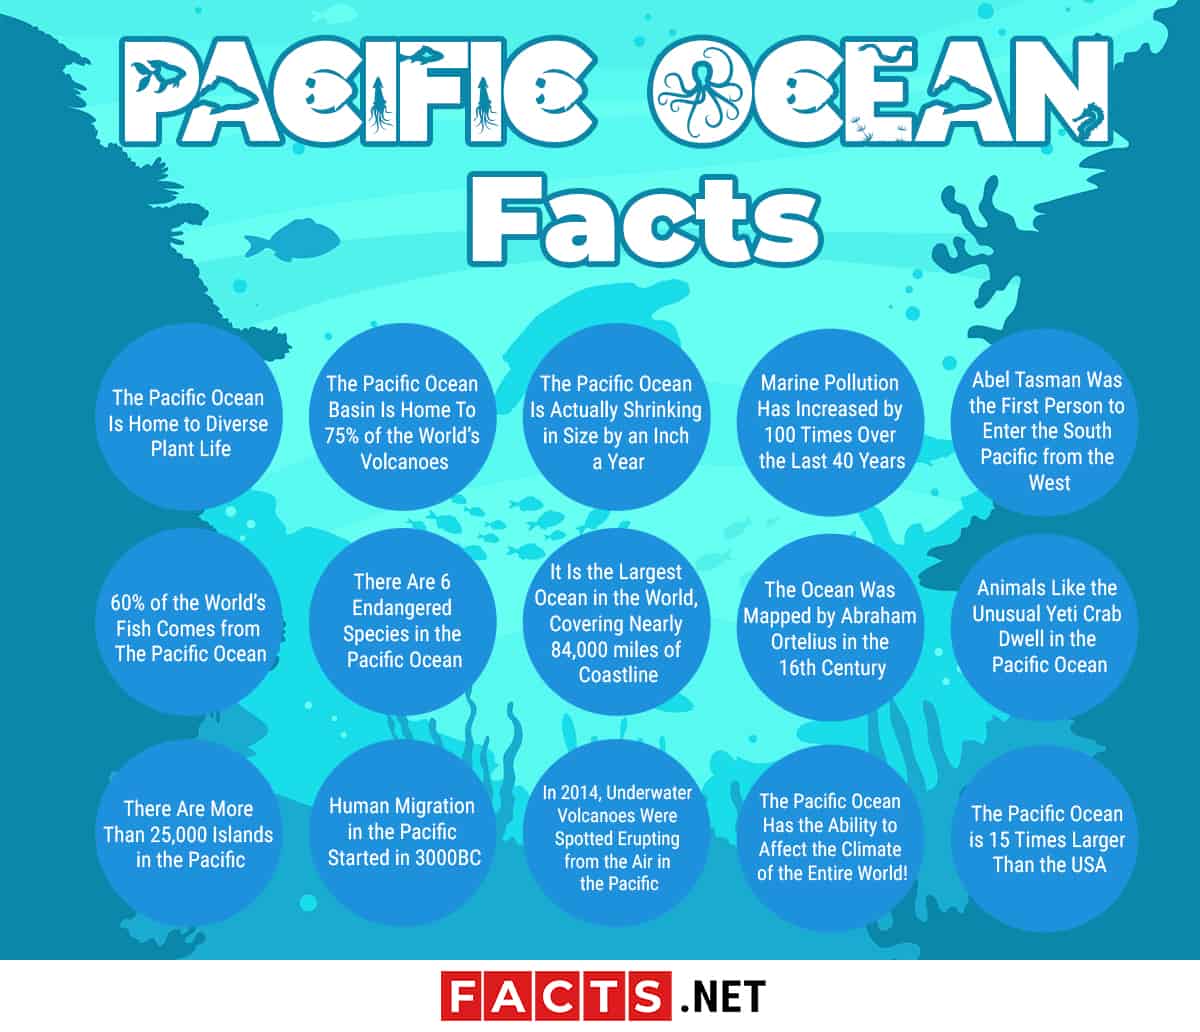 Top 15 Pacific Ocean Facts Nature, Economy, History & More